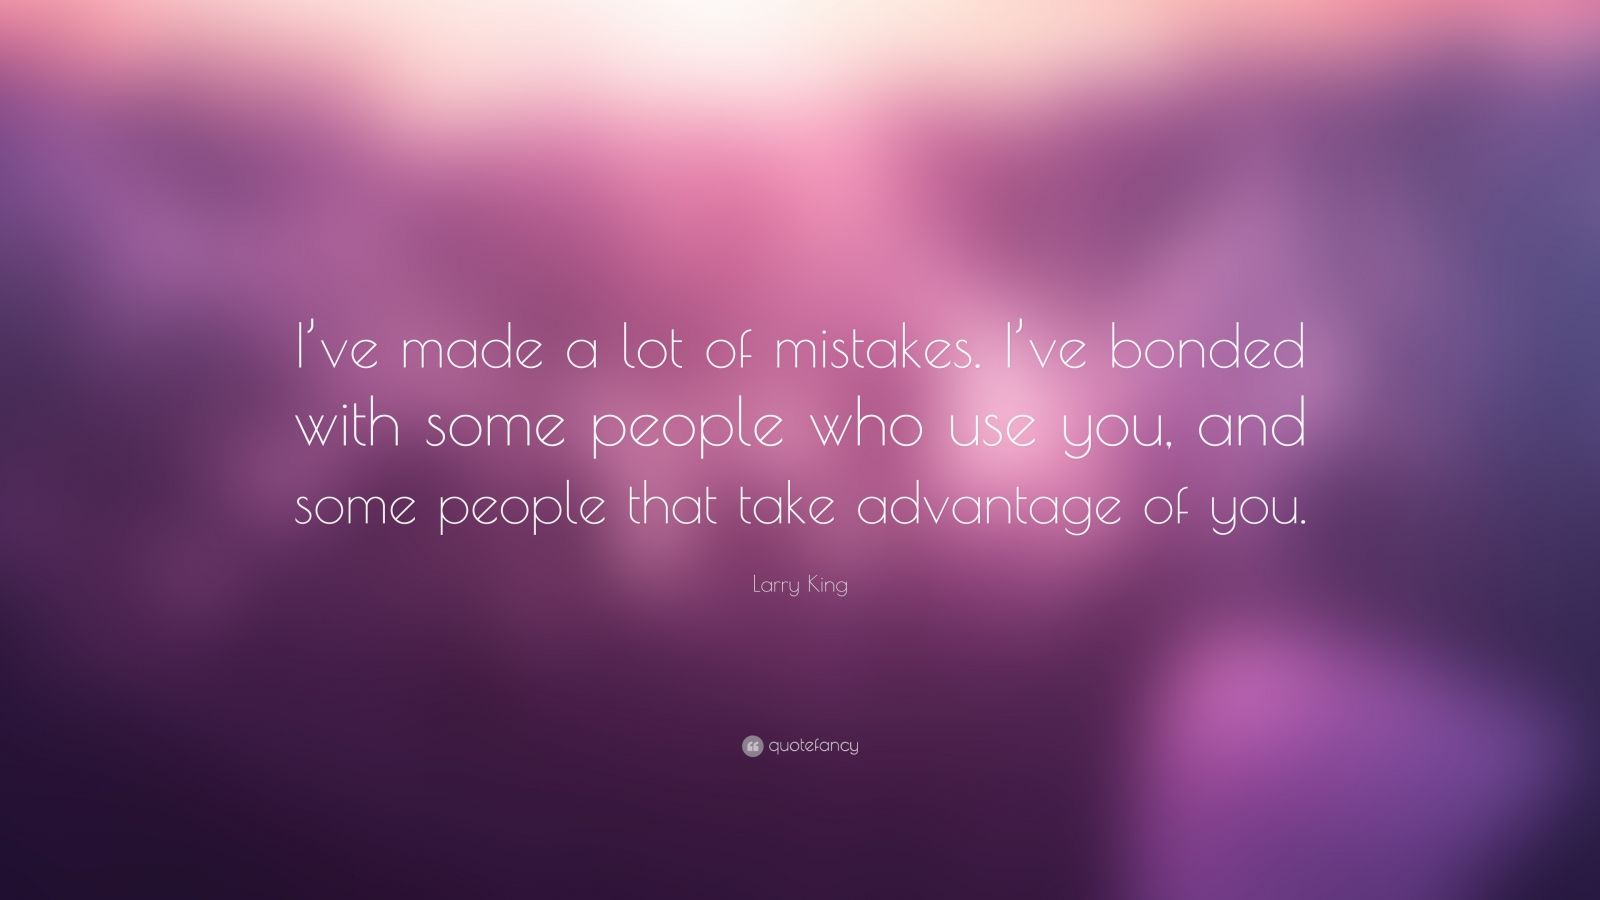 Larry King Quote: “I’ve made a lot of mistakes. I’ve bonded with some ...